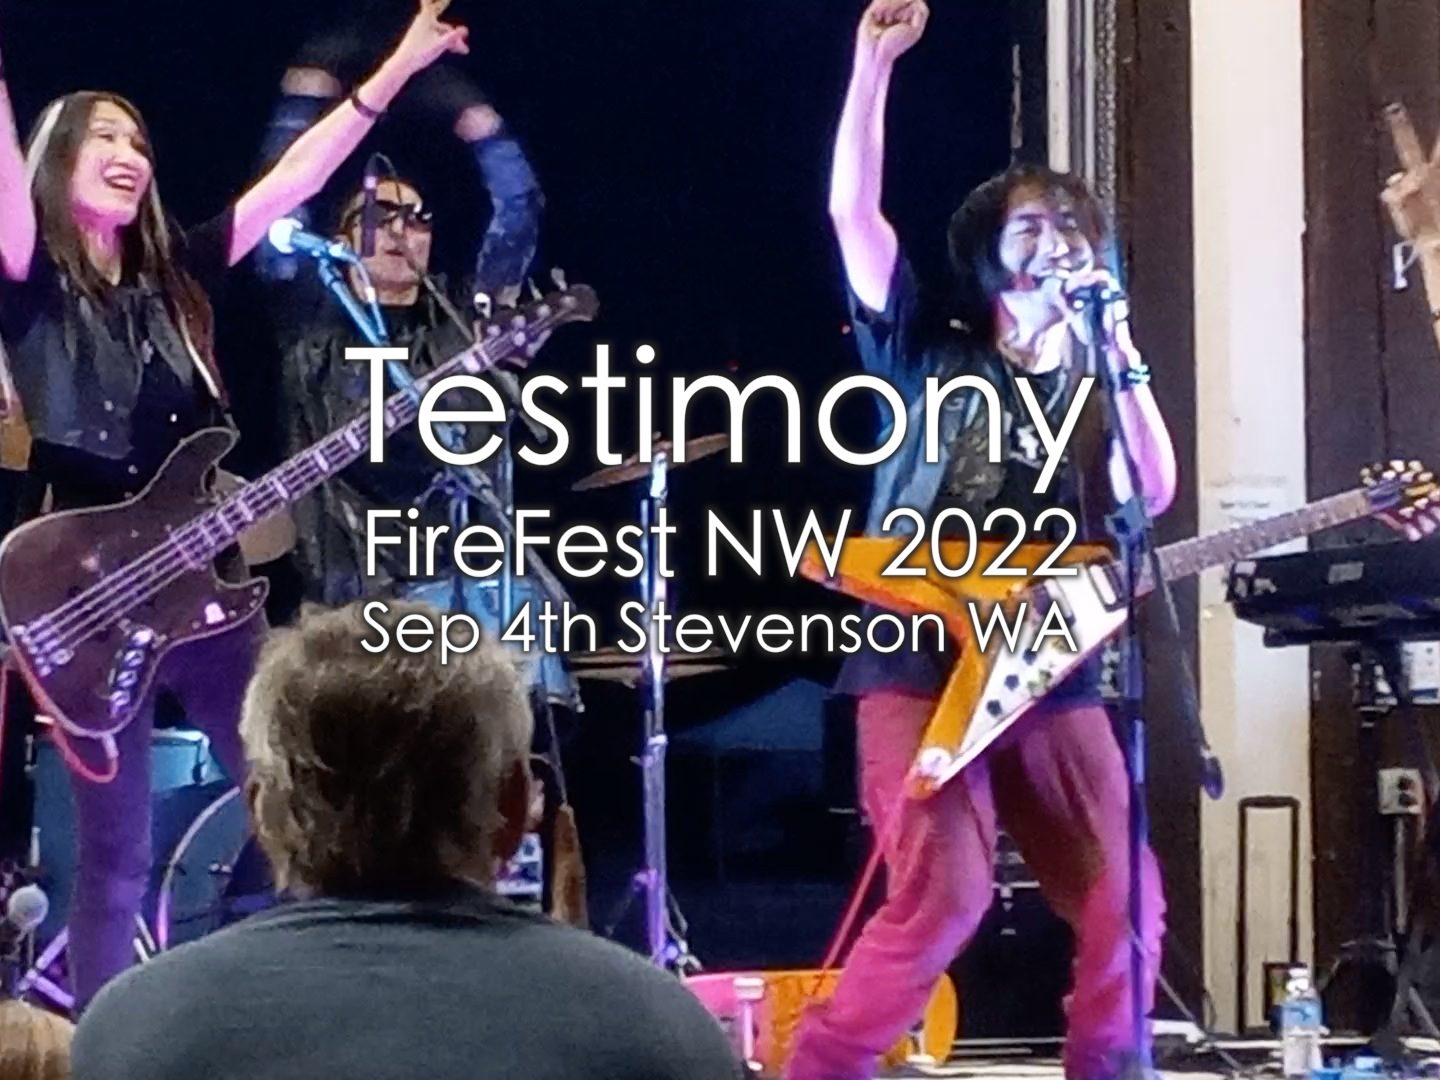 Testimony in a music form Live